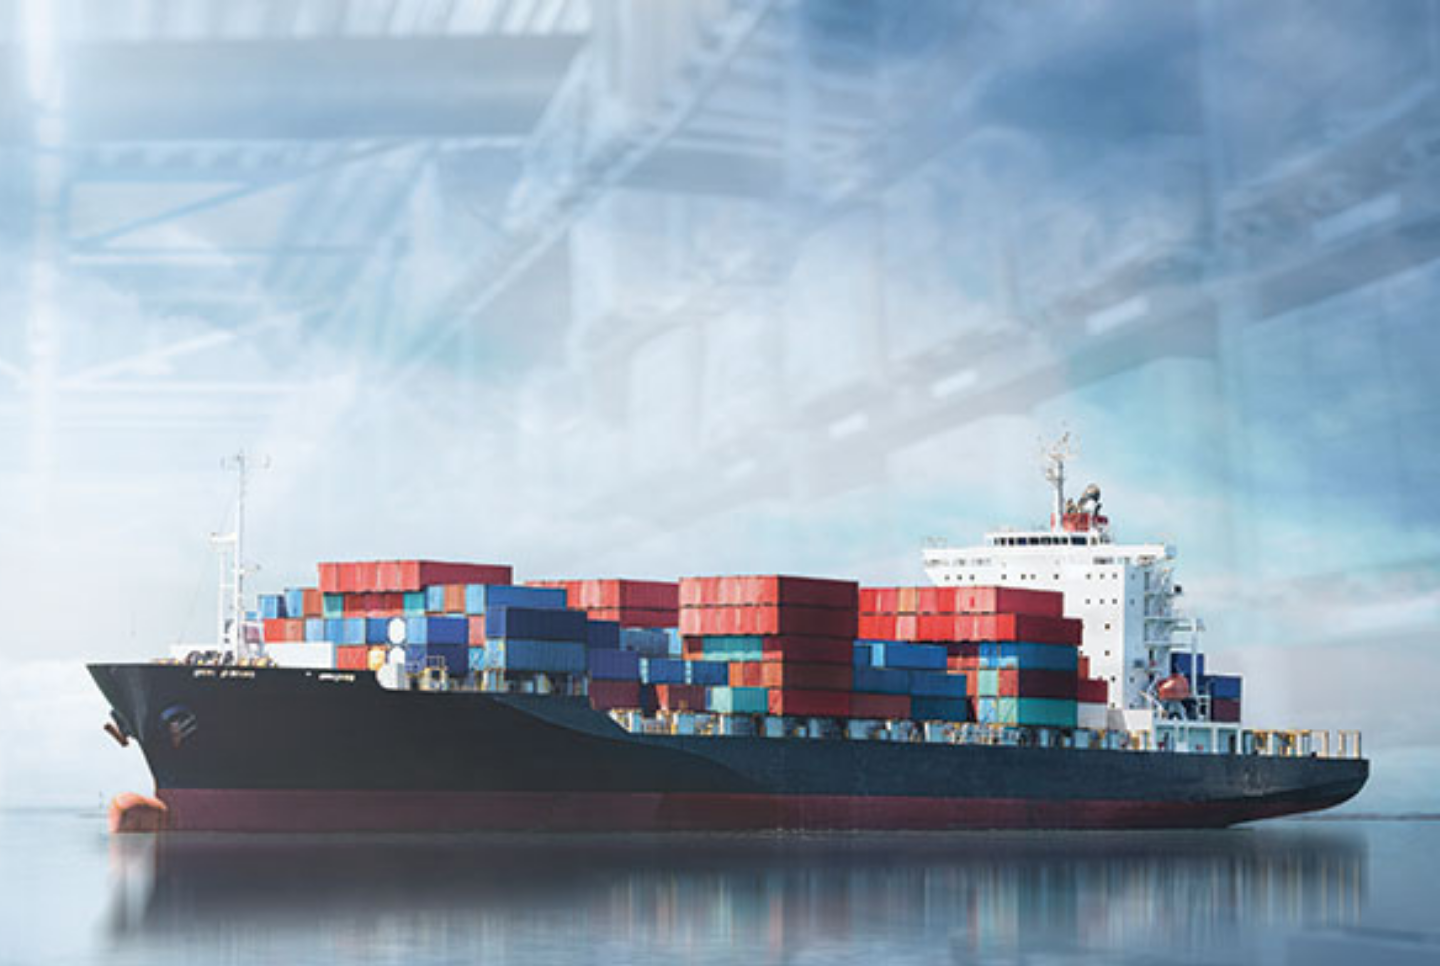 The Ocean Shipping Reform Act of 2021 would beef up the Federal Maritime Commission’s role in ensuring fair trade practices